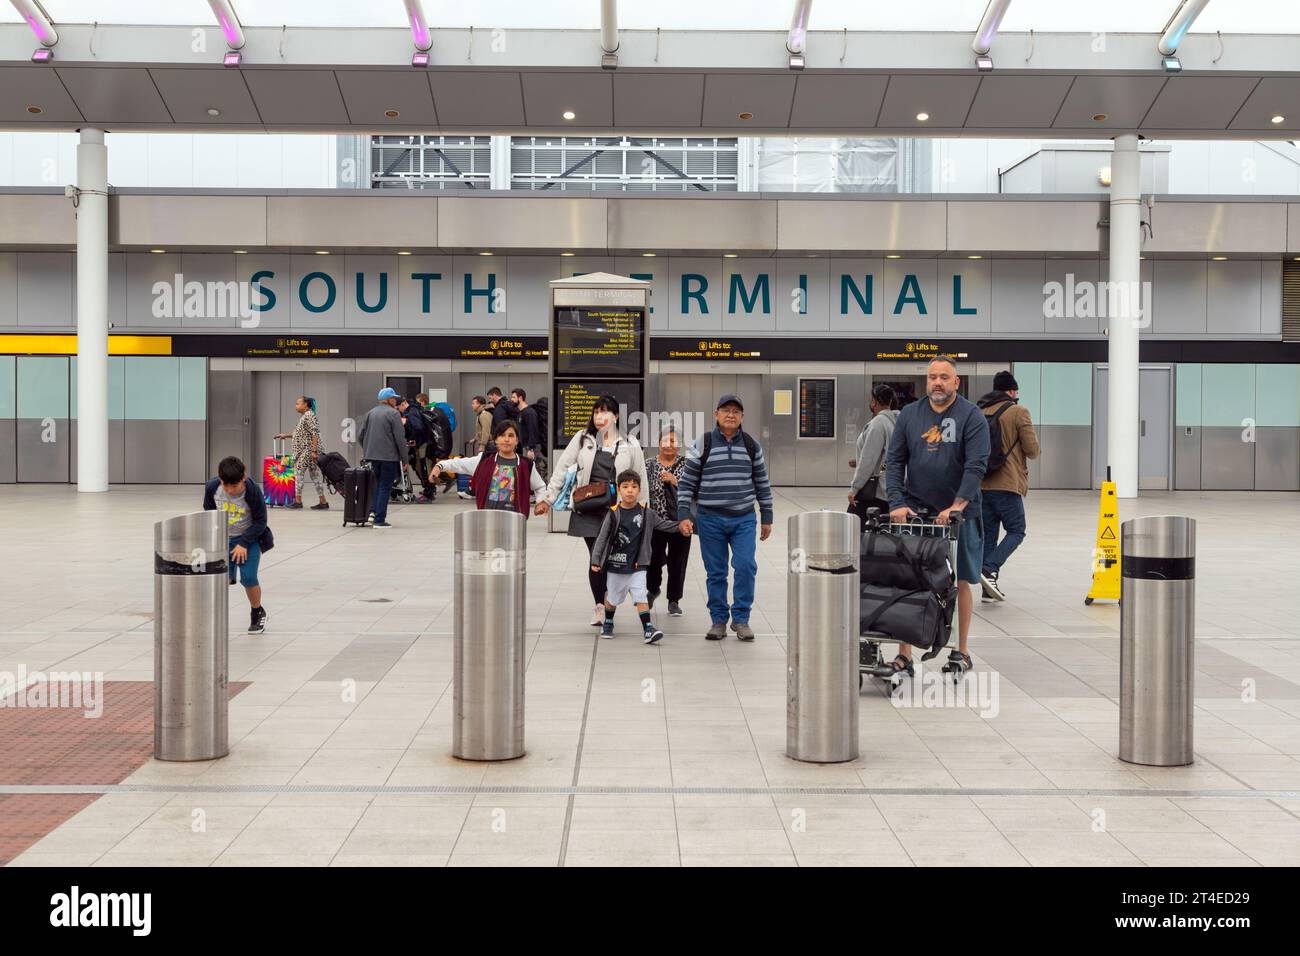 Gatwick airport, Horley, Gatwick, West Sussex, United Kingdom. Stock Photo